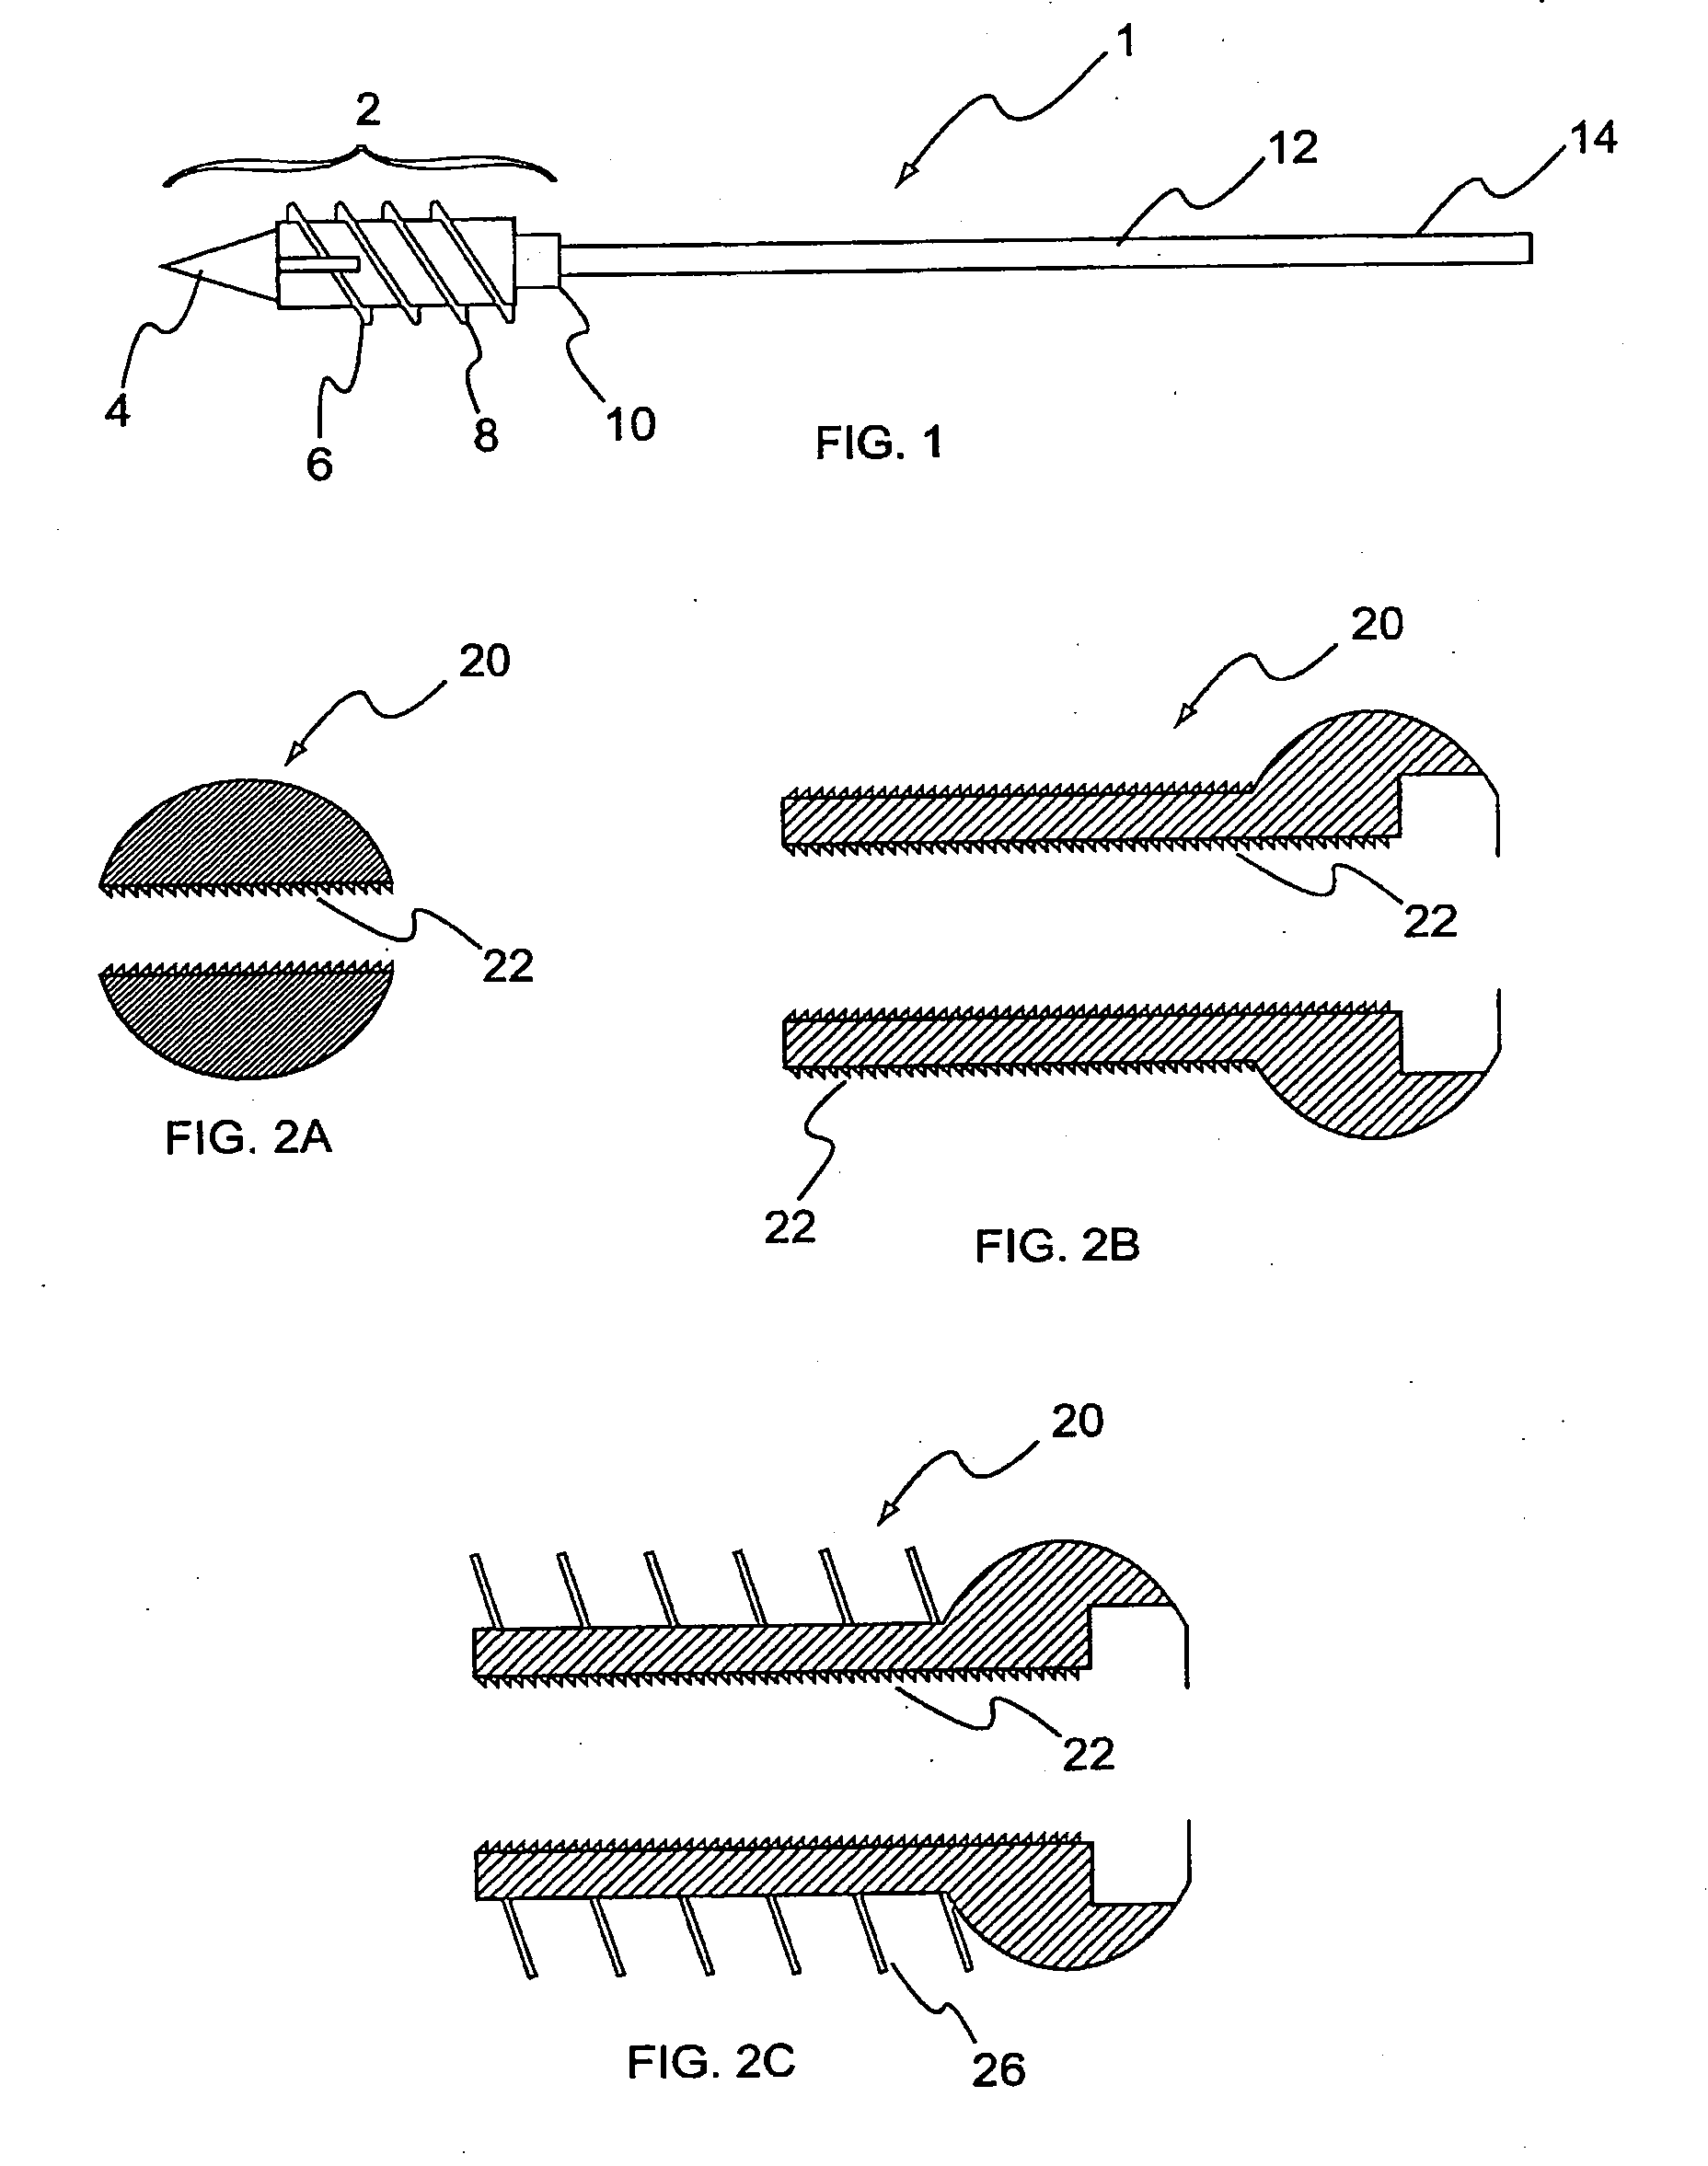 Method for the fixation of bone structures